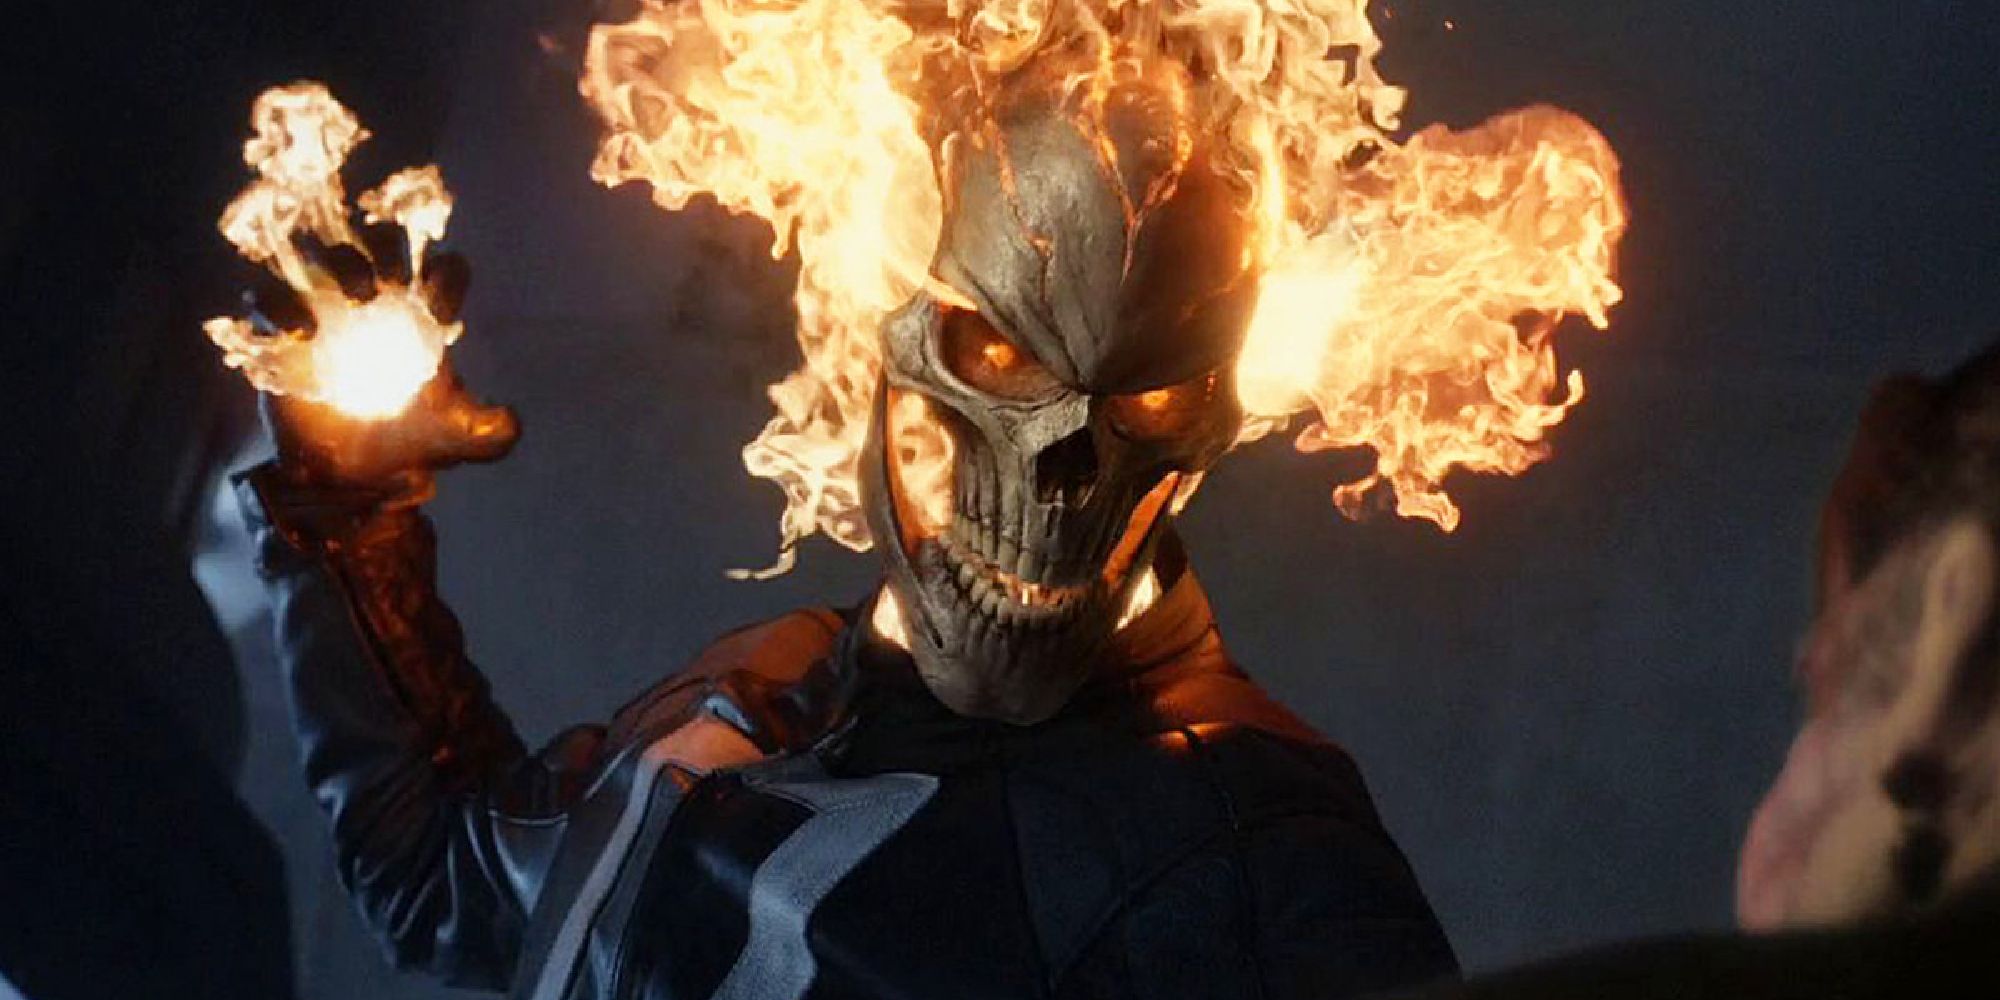 Ghost Rider conjuring a fireball in Agents of S.H.I.E.L.D.